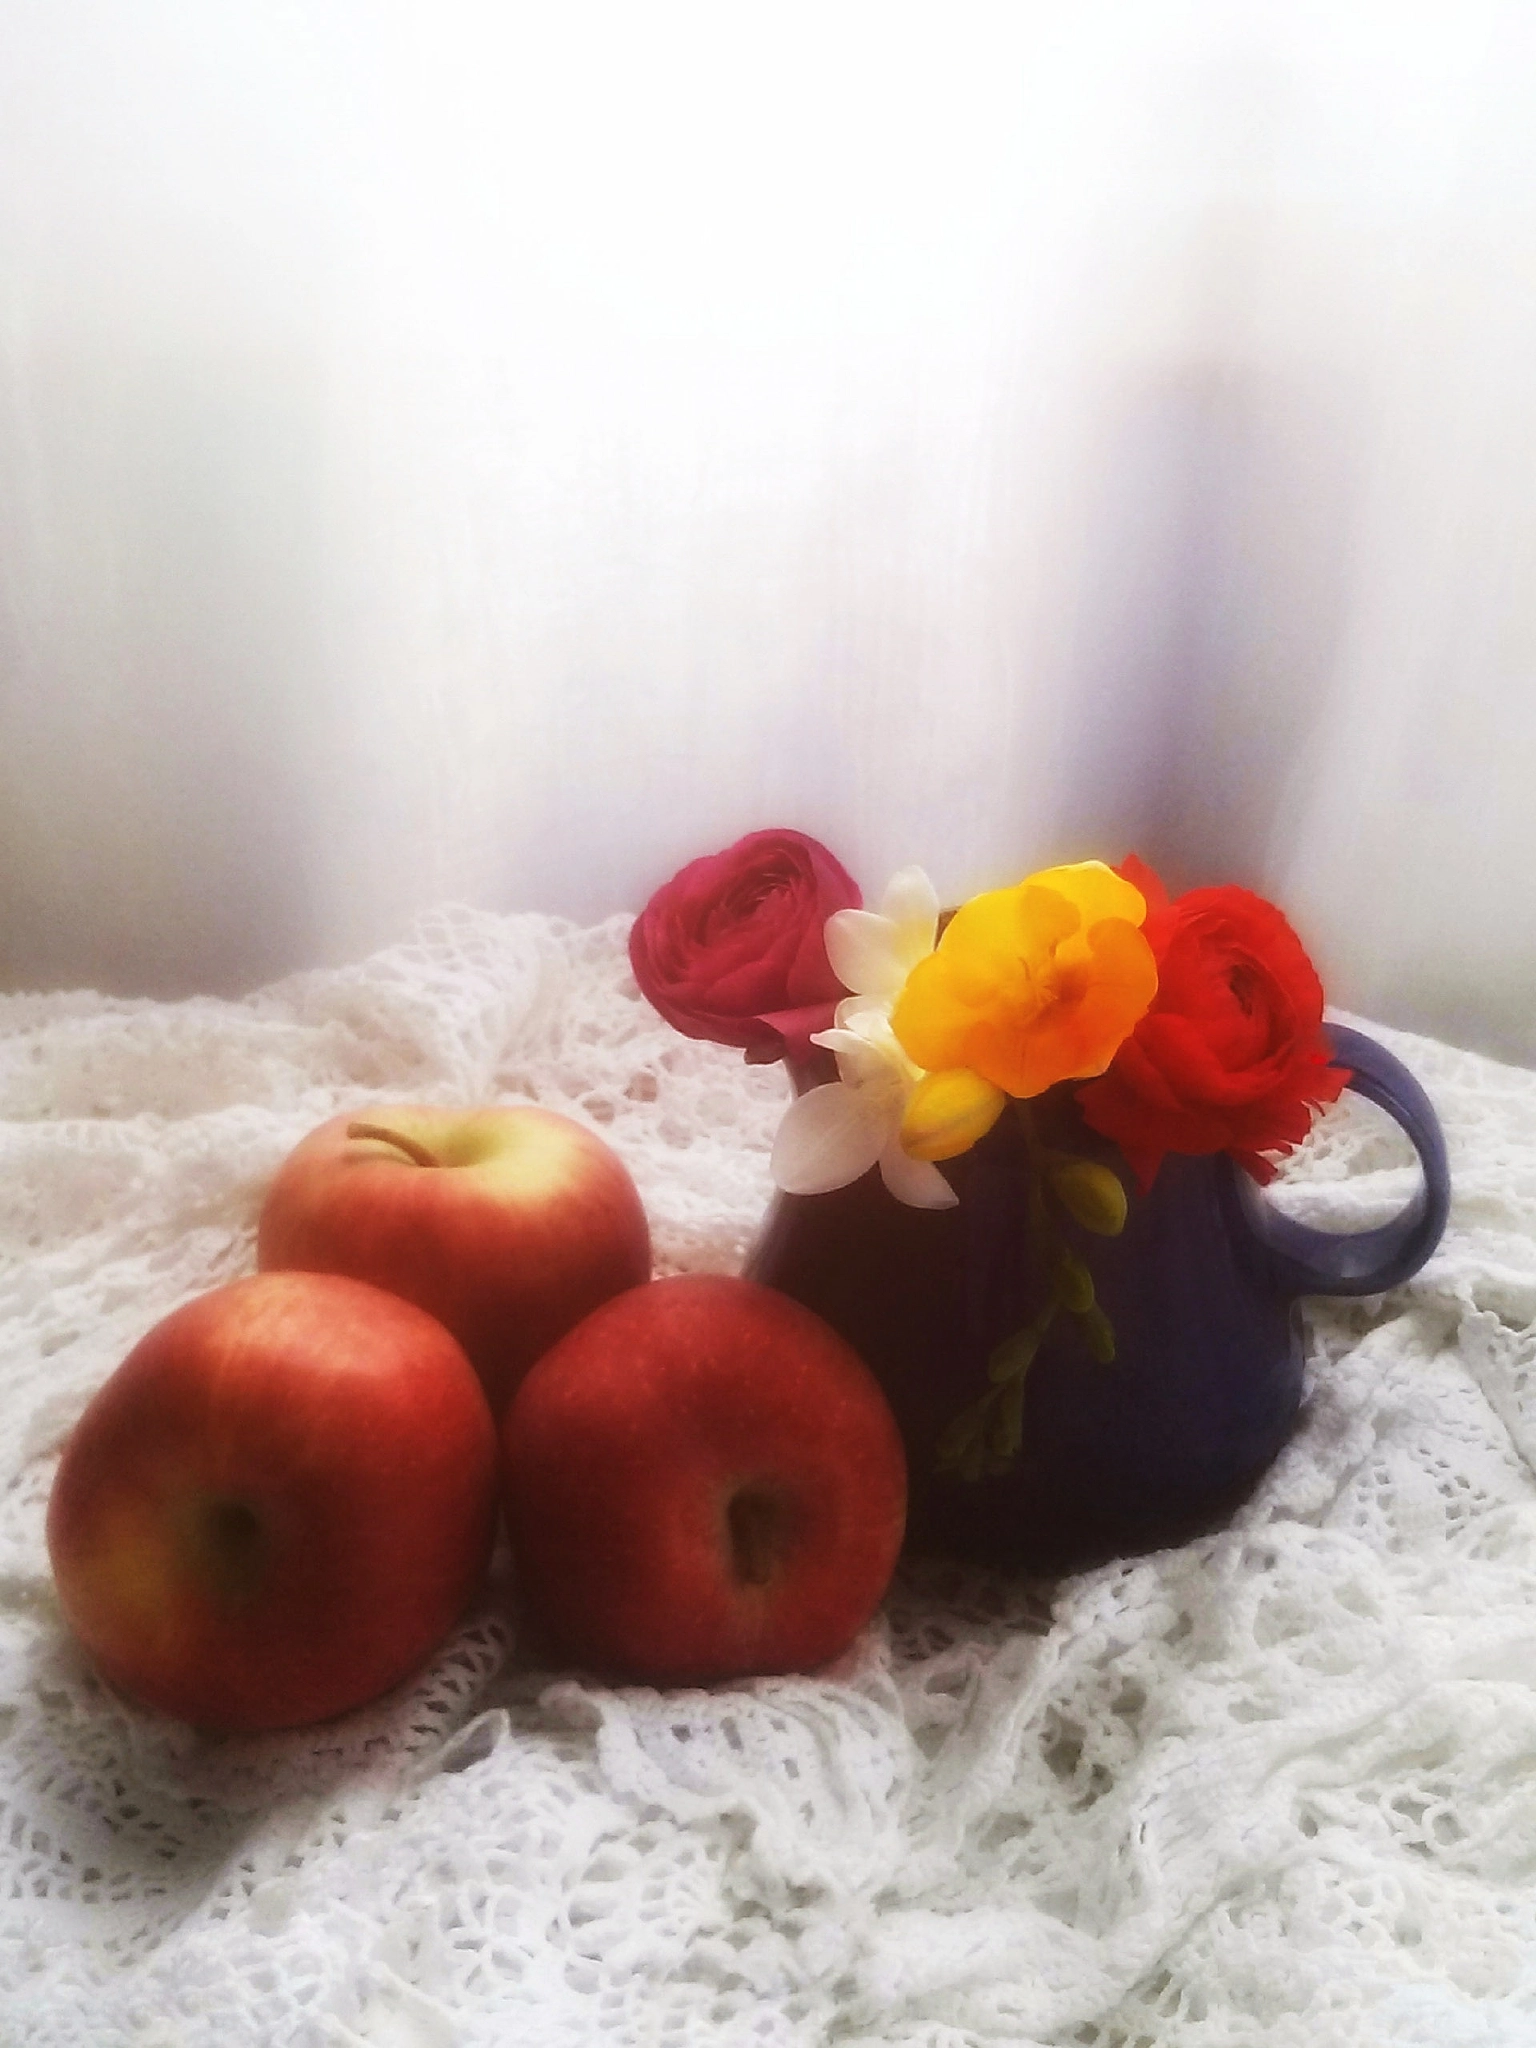 LG OPTIMUS L9 II sample photo. Flowers and apples photography